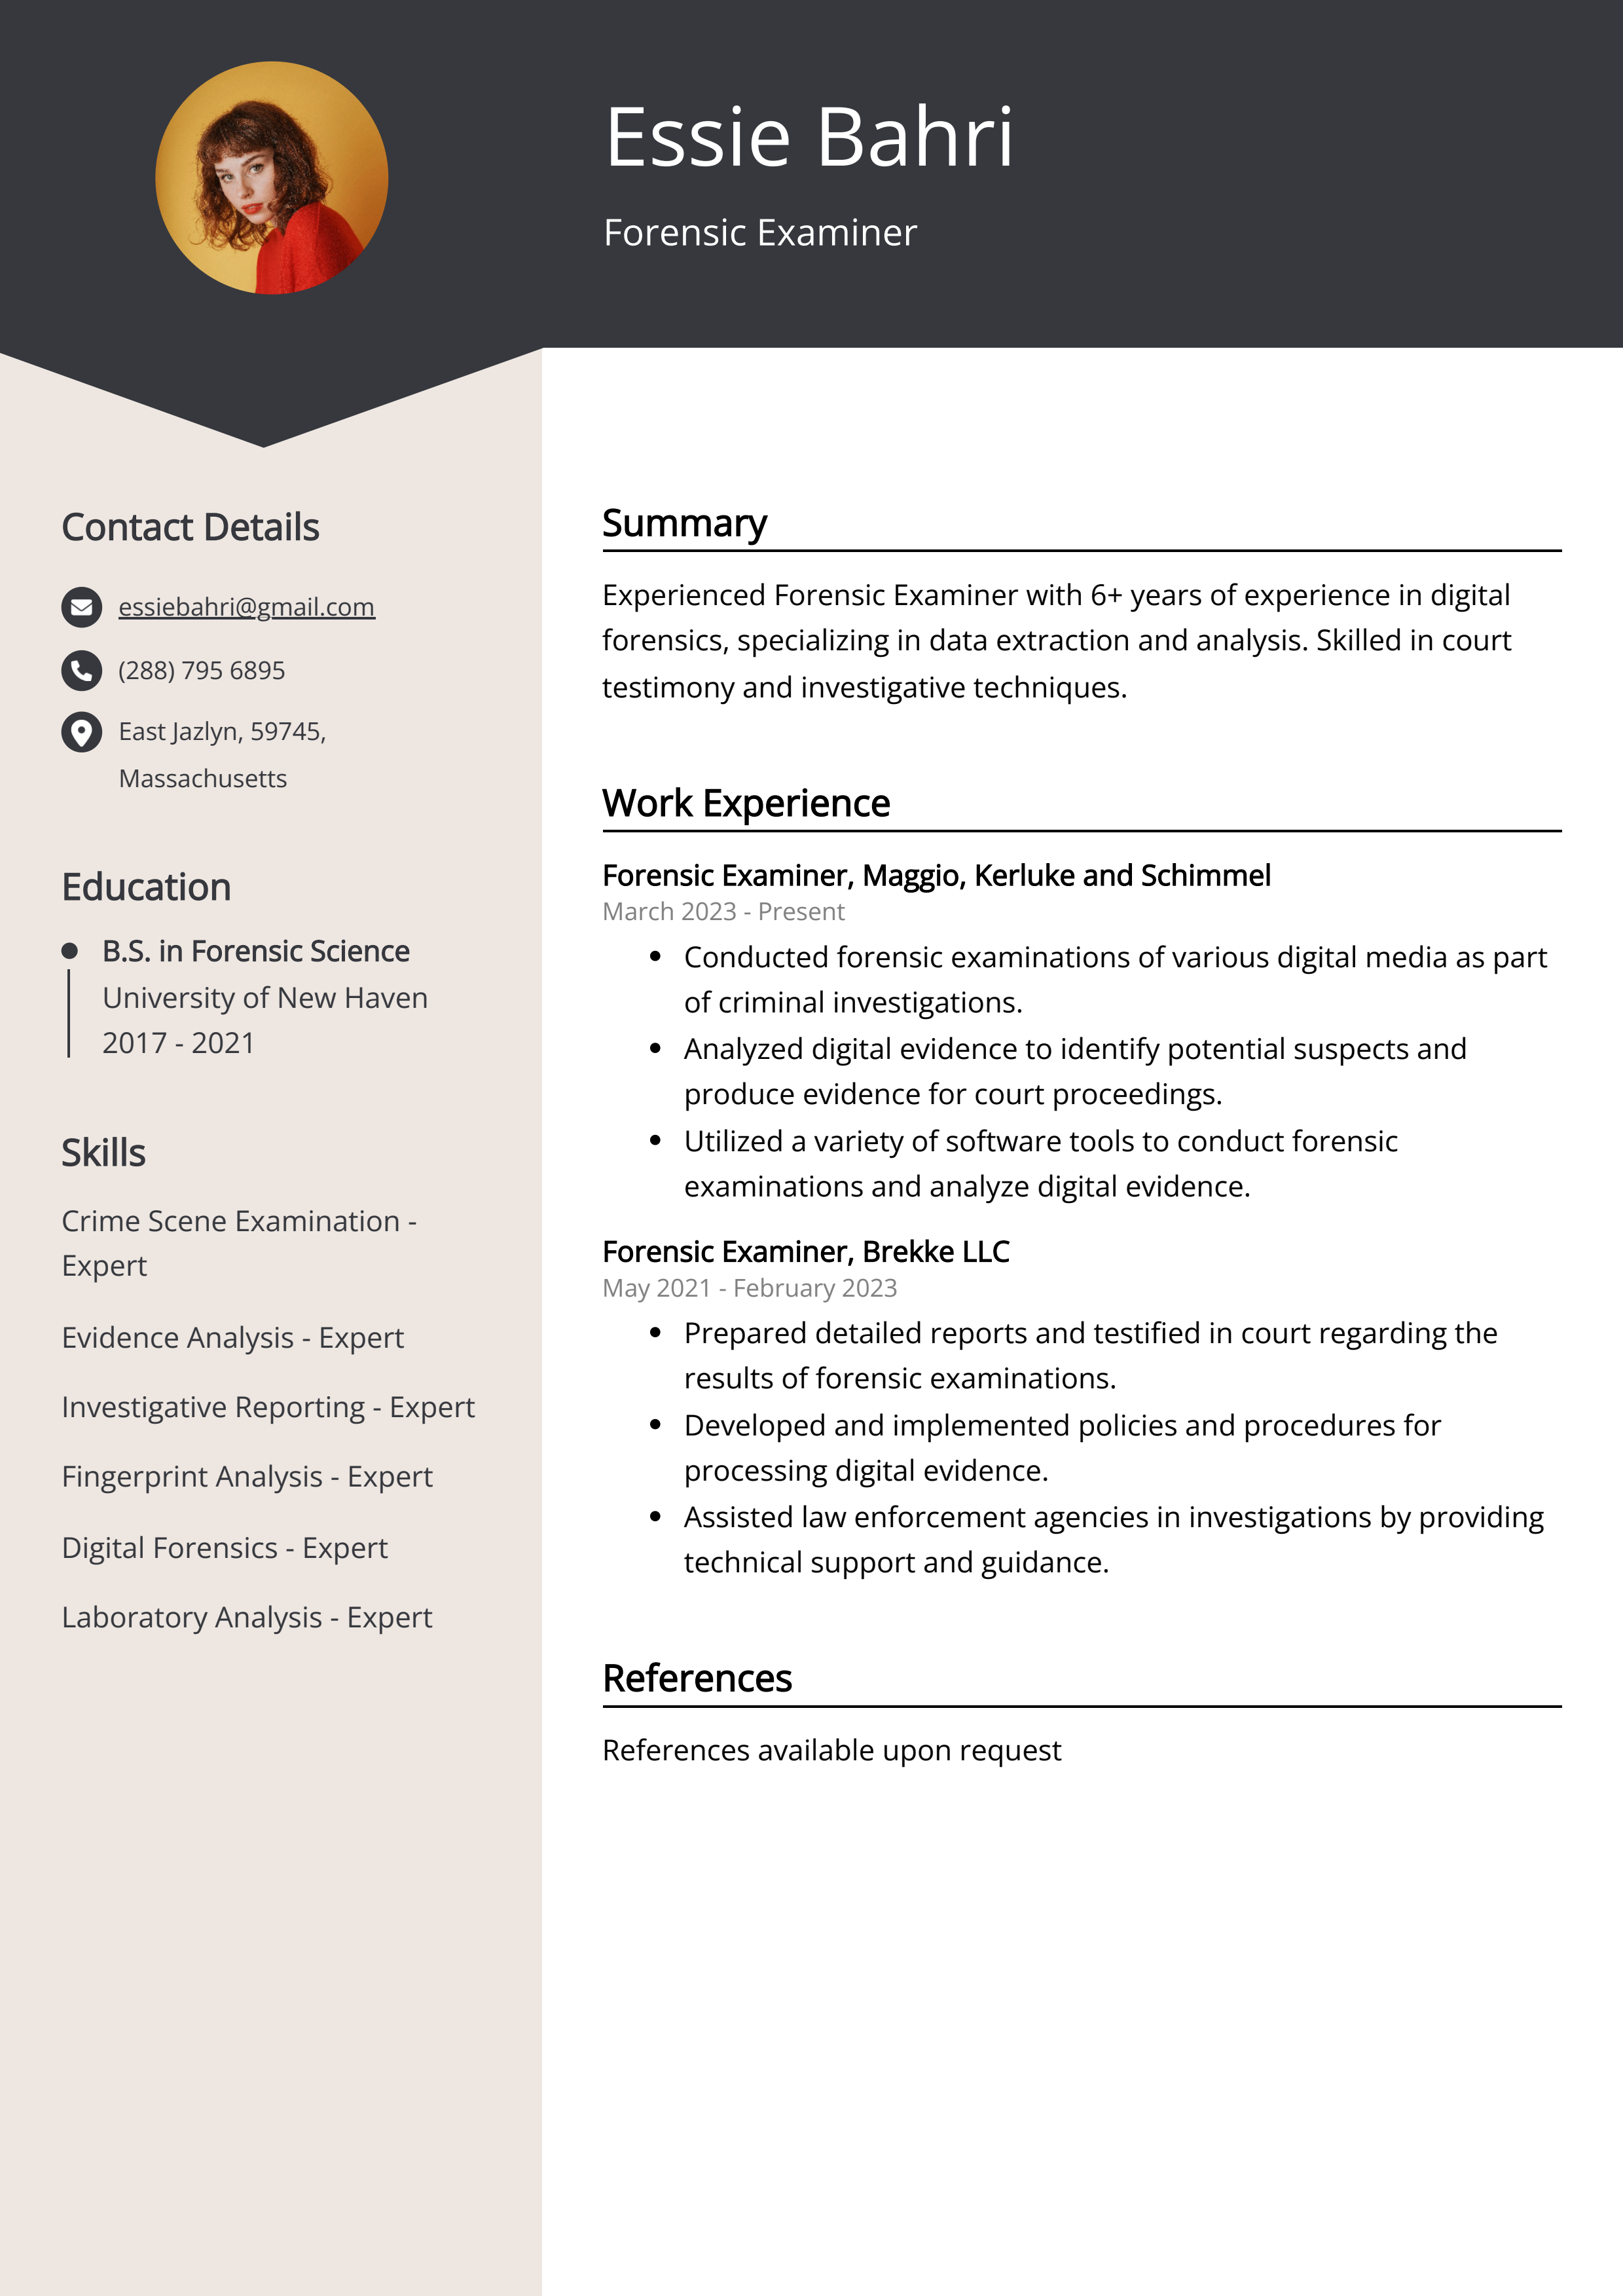 Forensic Examiner CV Example